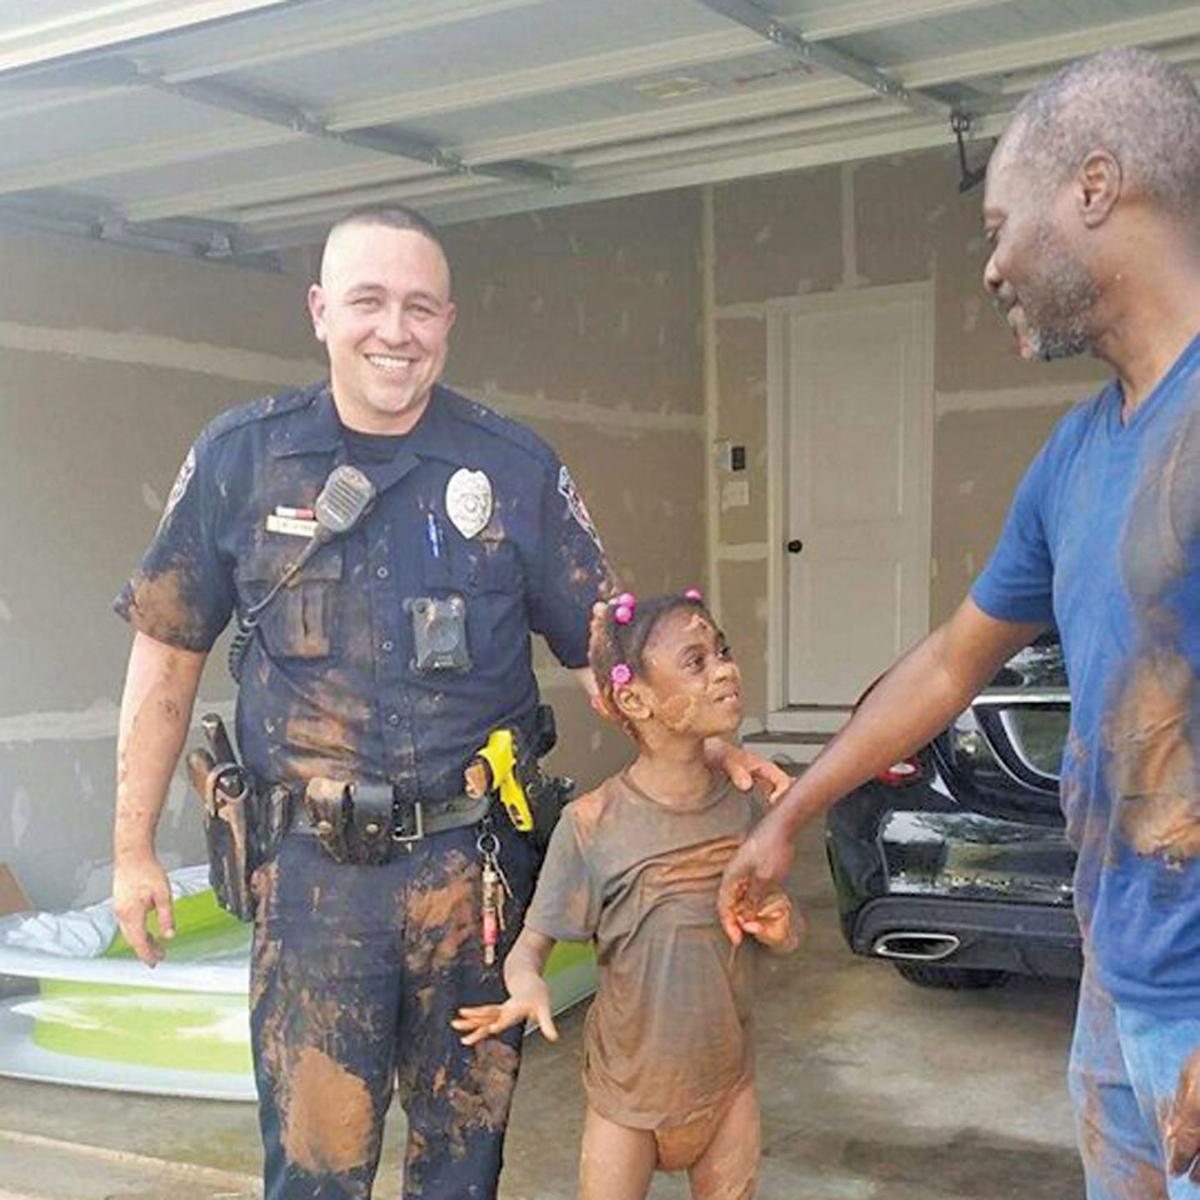 Town Police Officer Rescues Young Girl With Autism In